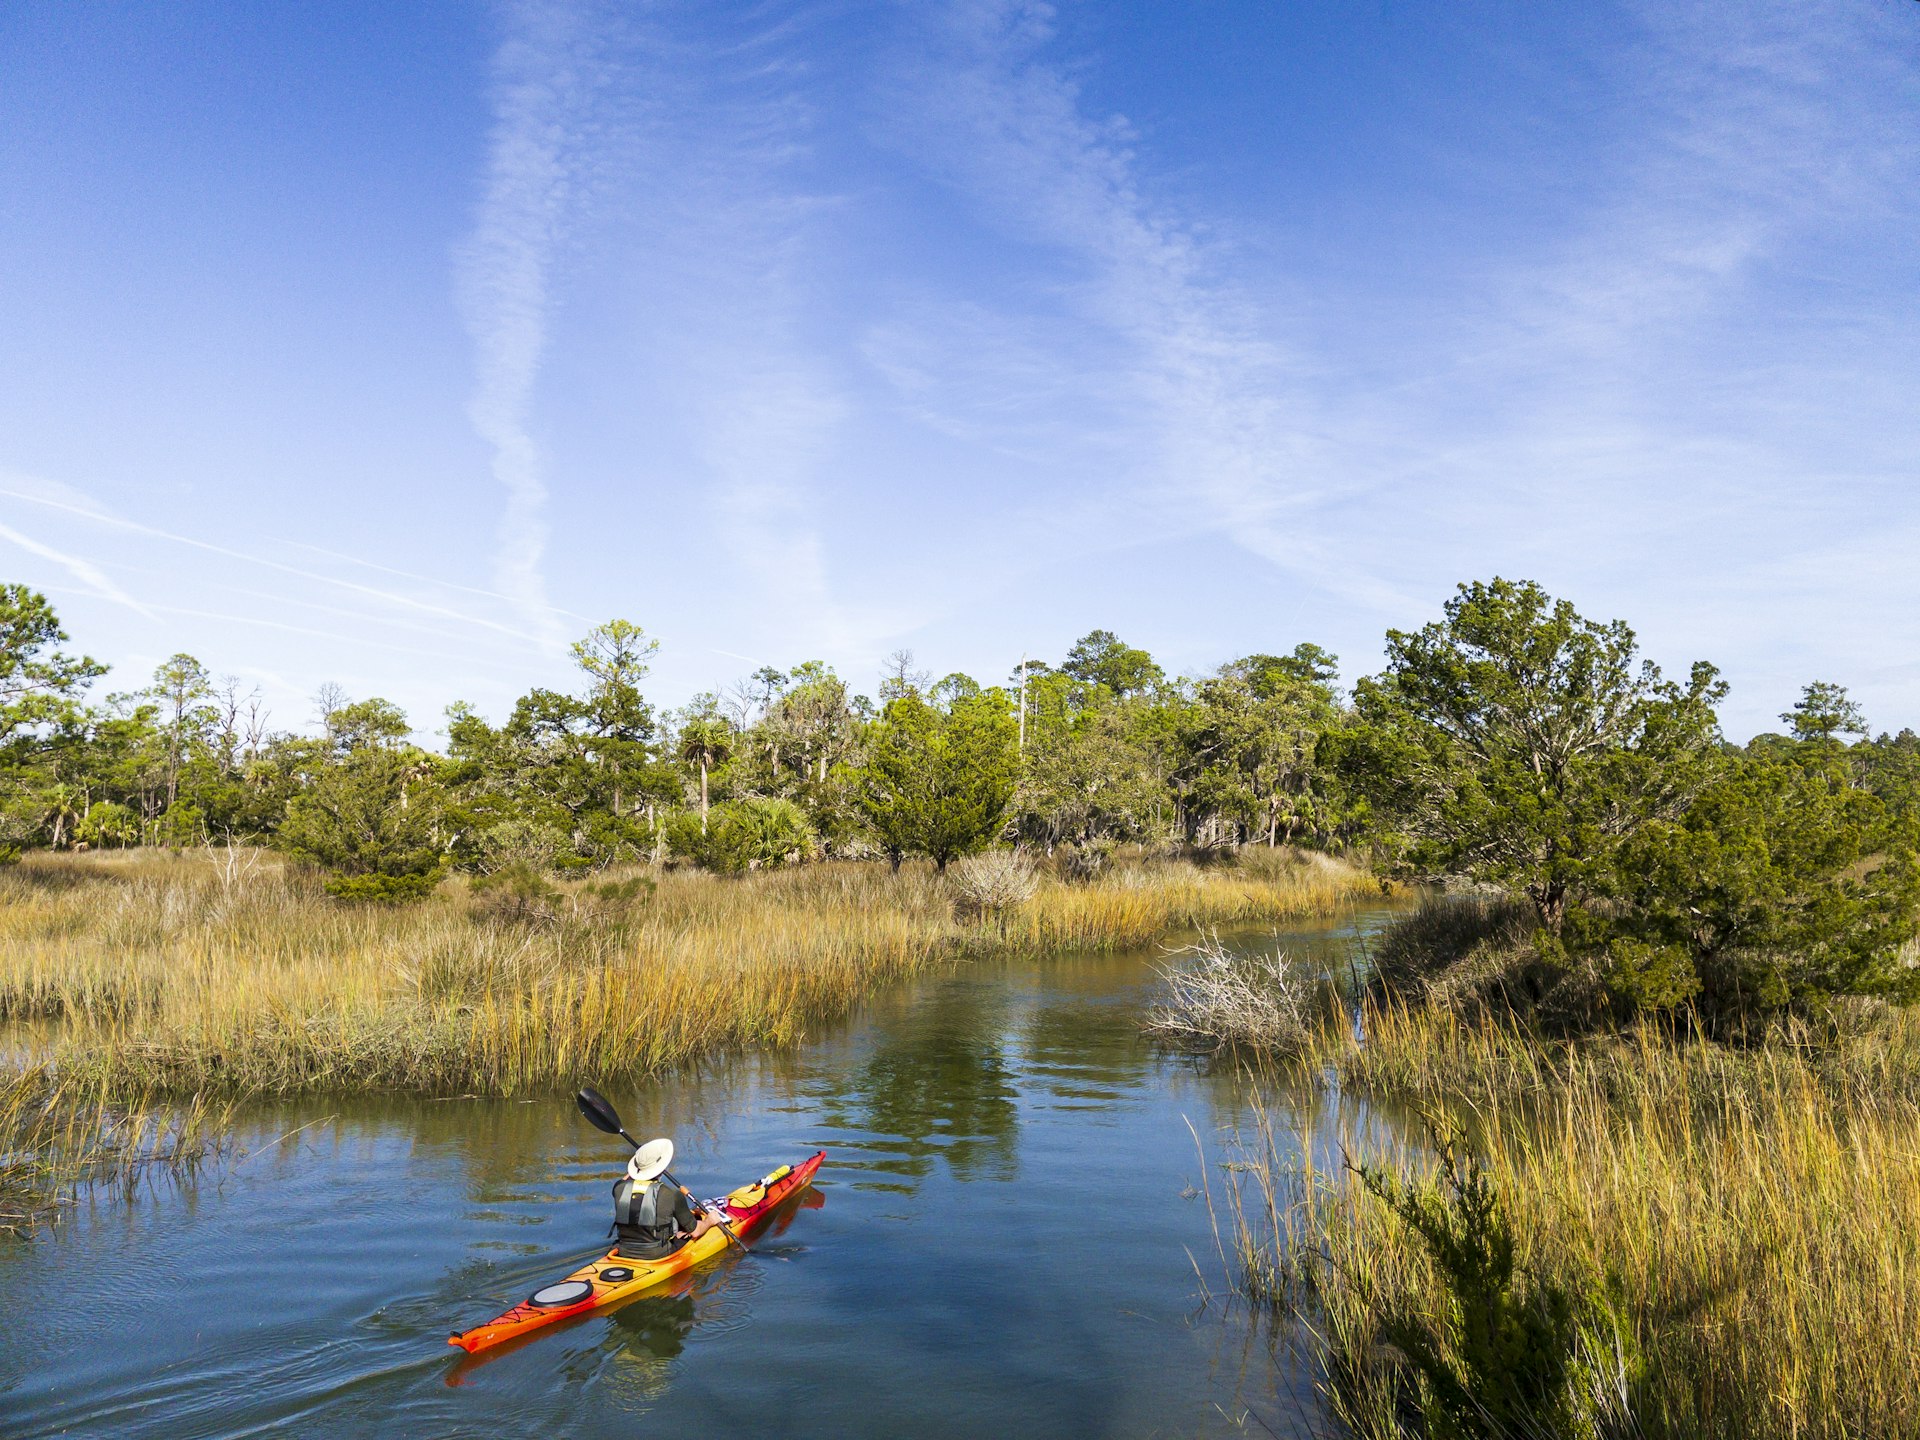 A red-and-yellow kayaker glides through water surrounded by reeds and rushes